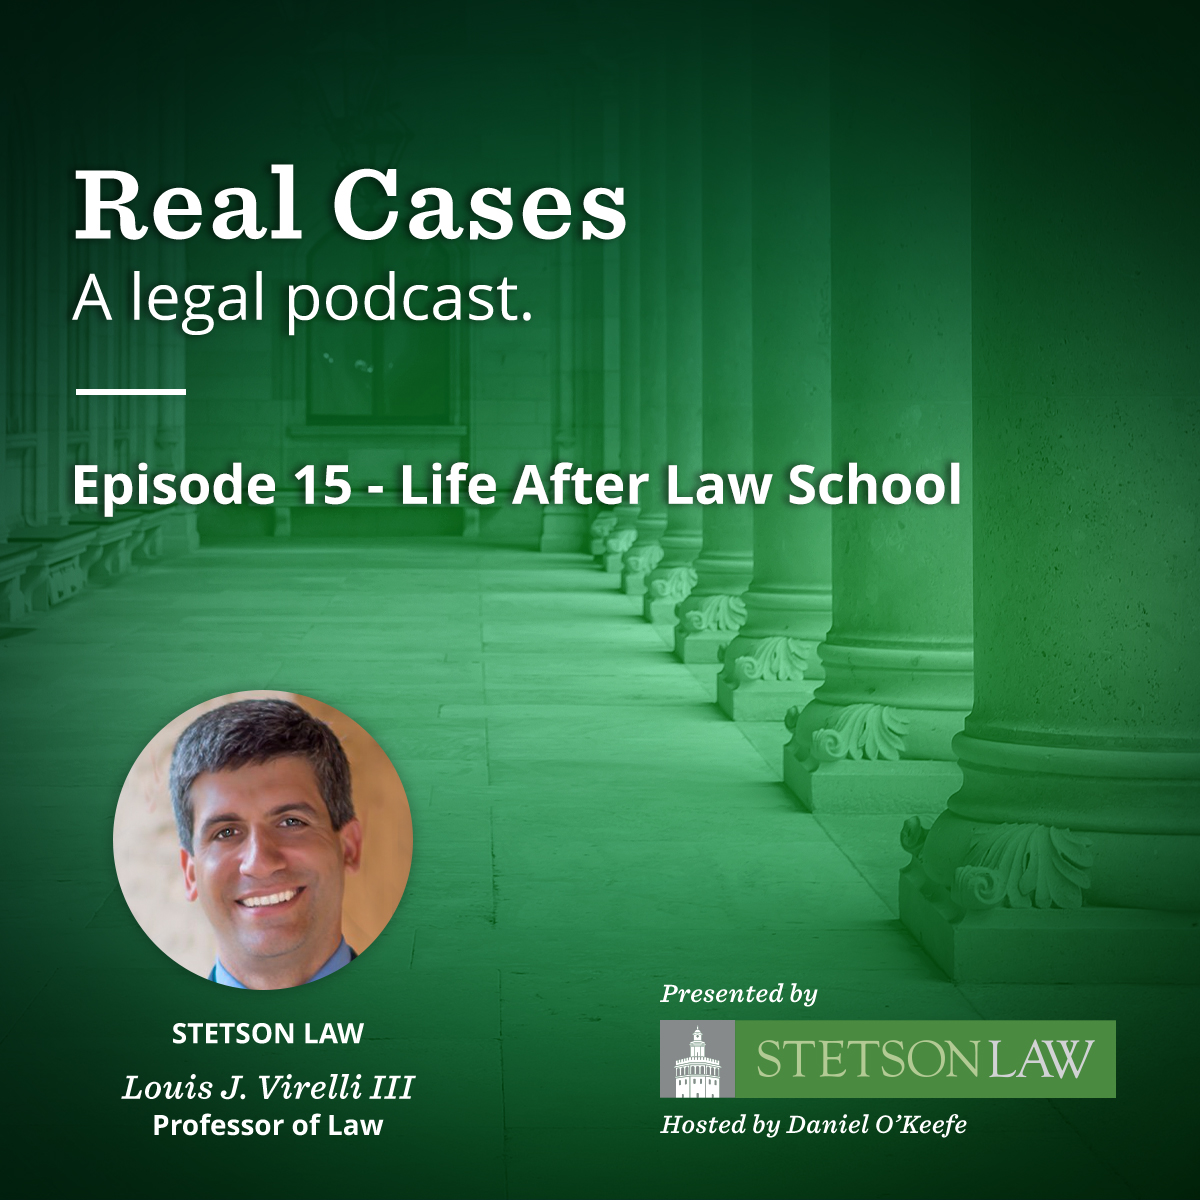 Real Cases - A legal podcast. Episode 15: Life After Law School - Stetson Law Professor Louis Virelli III